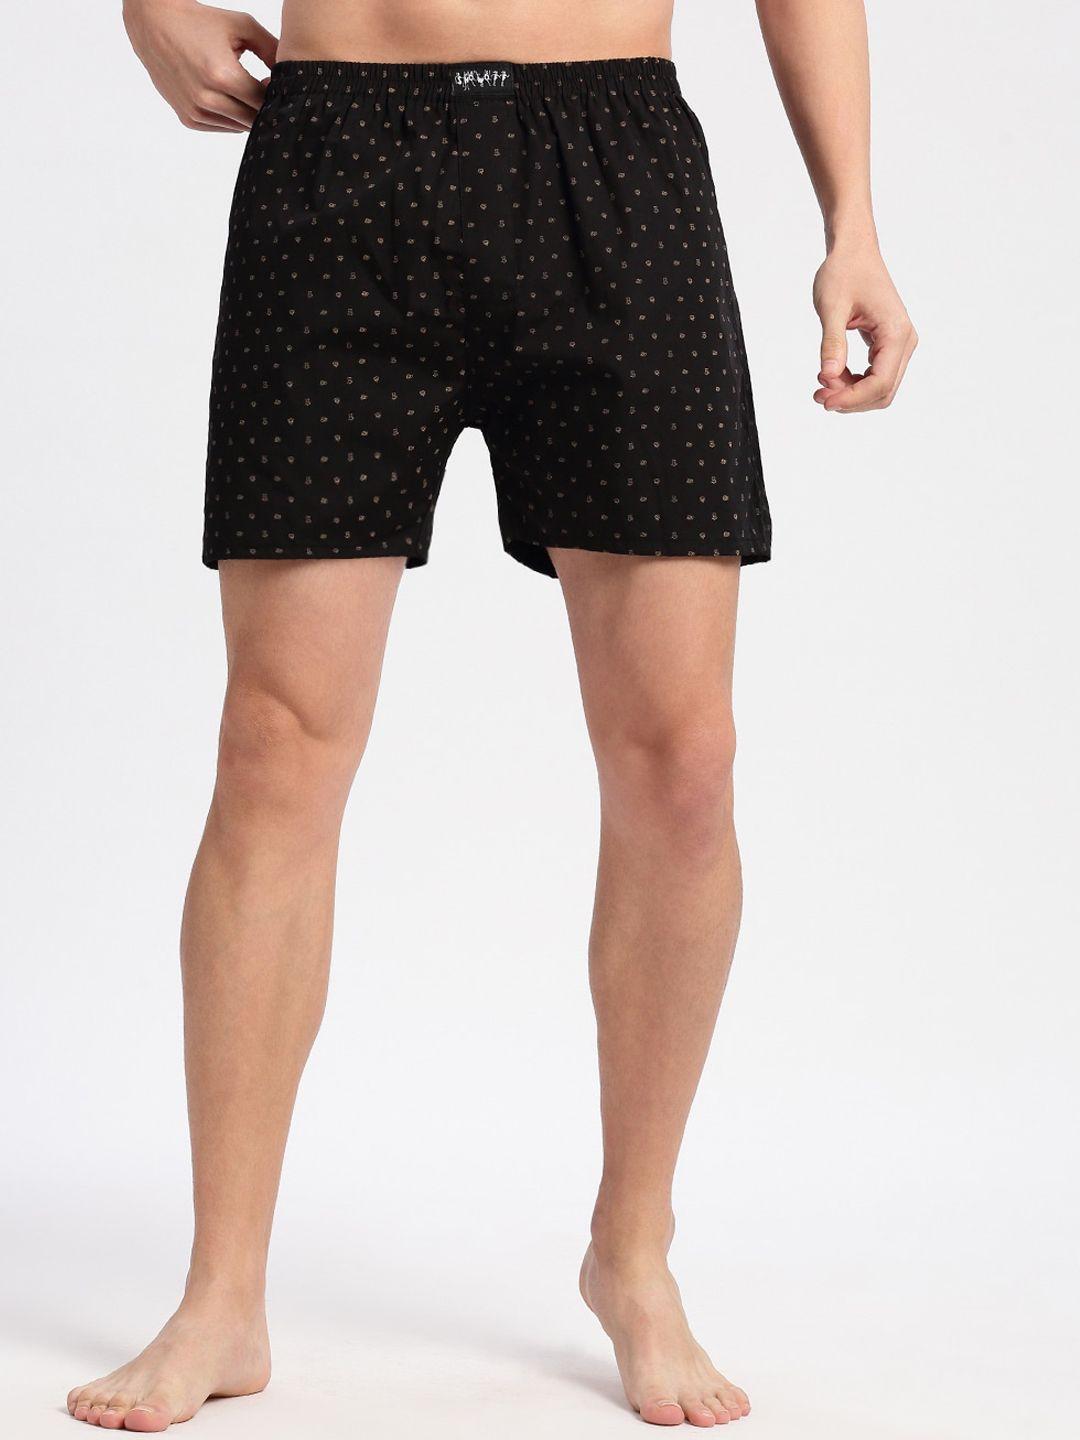 showoff-micro-printed-cotton-boxers-am-141-8